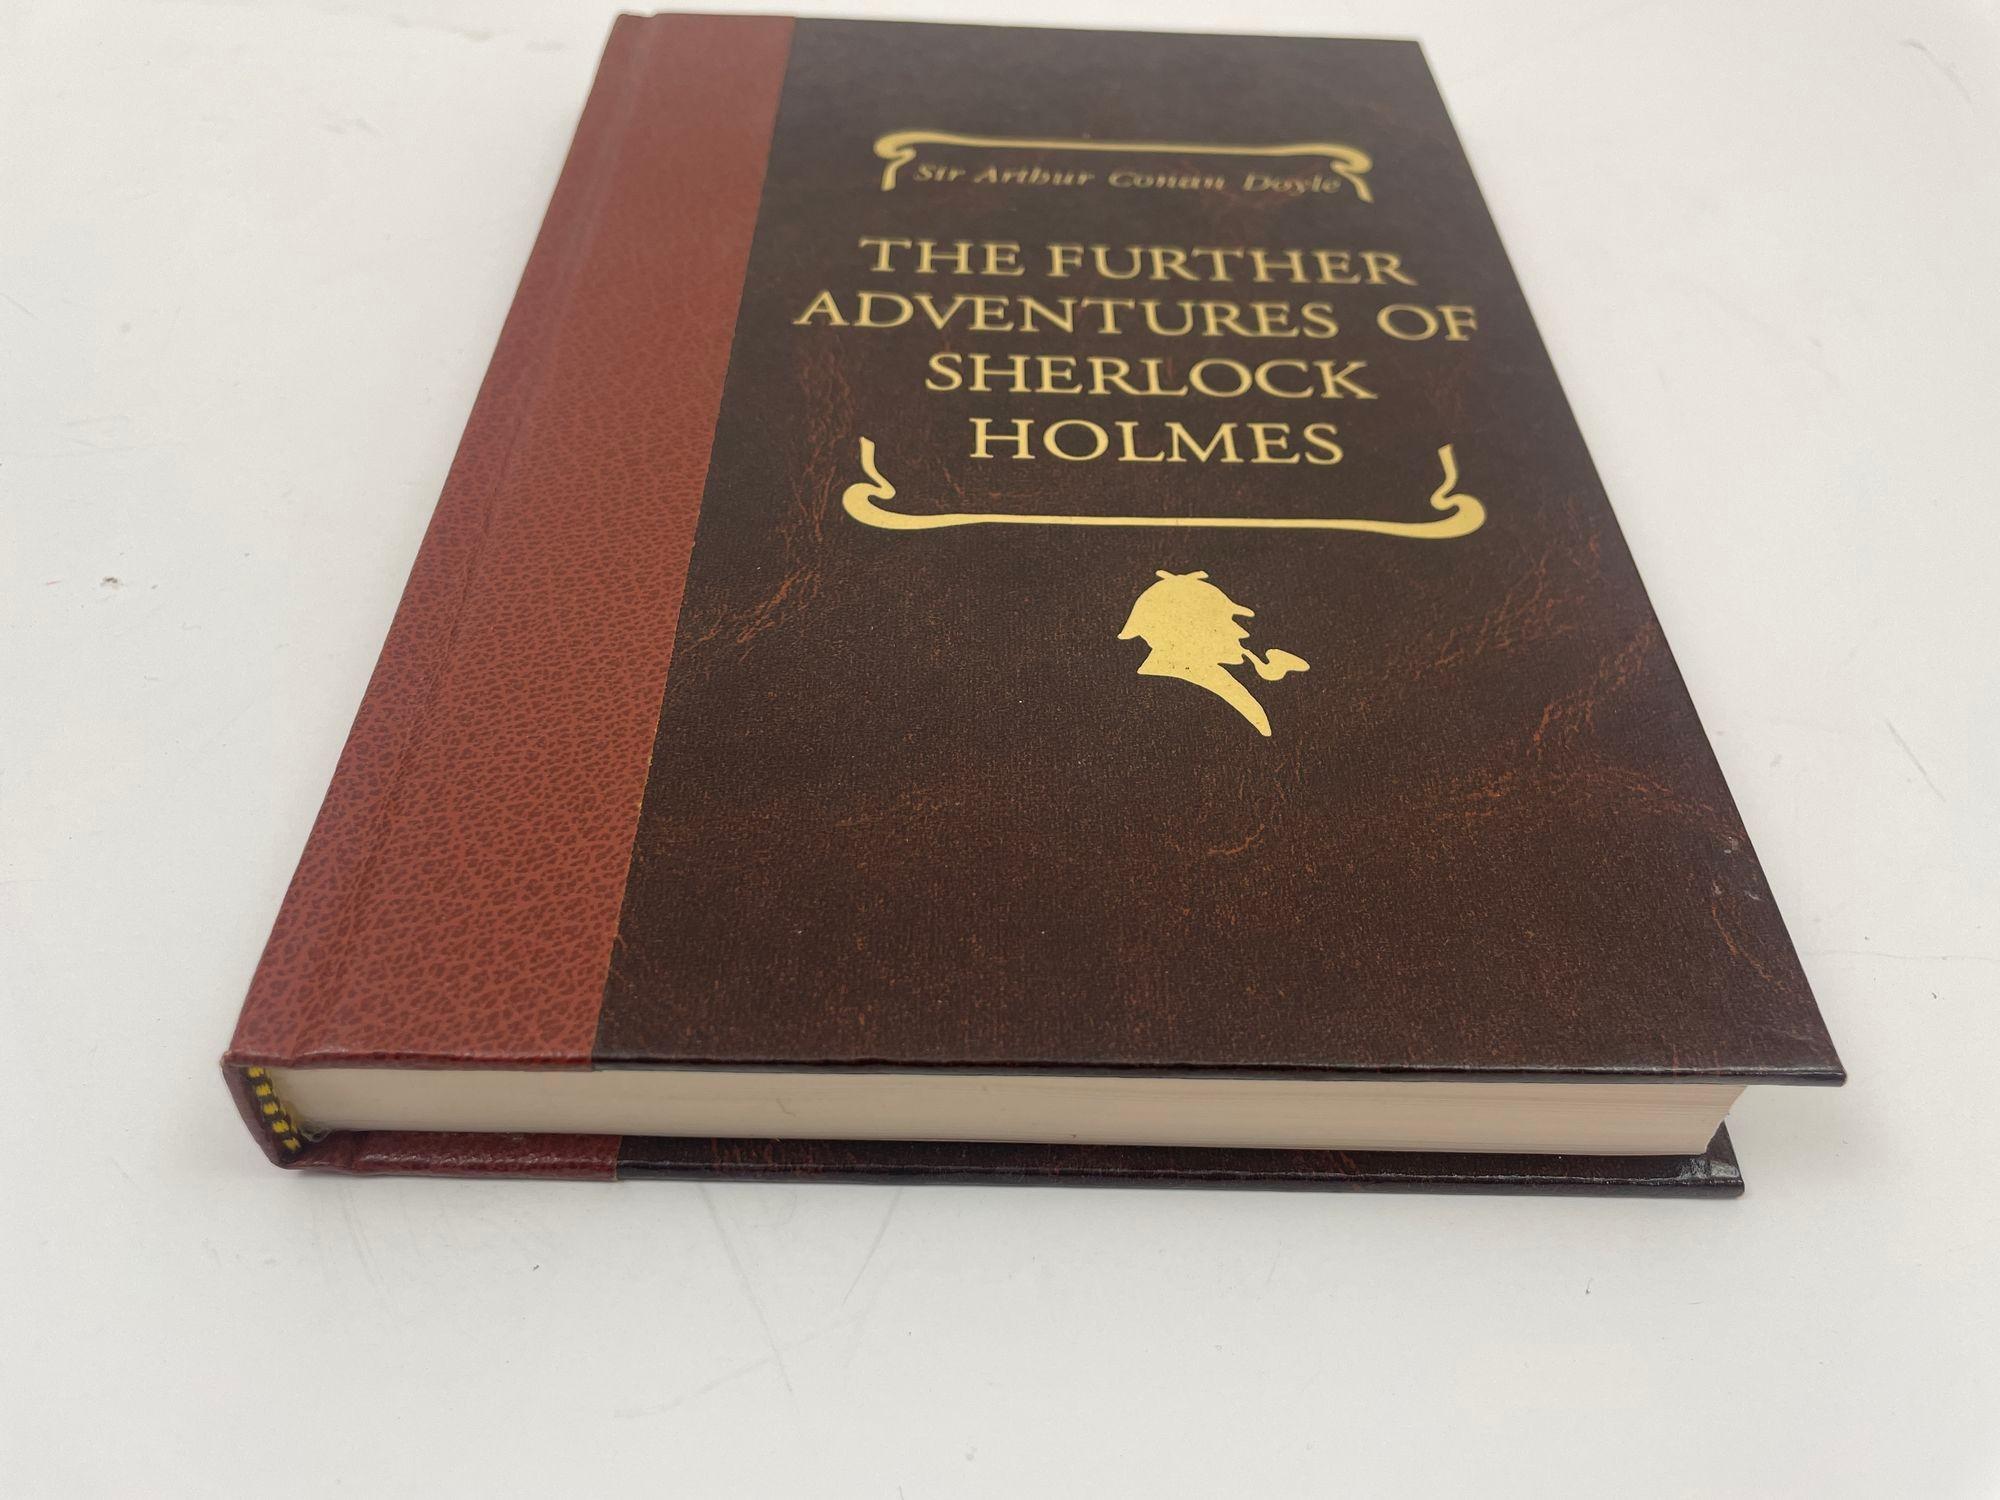 The Further Adventures of Sherlock Holmes by Arthur Conan Doyle.
Collectible hardcover book.
New York: Reader's Digest Association, 1993.
First Edition First Printing.
Hardcover, English 219 pages.